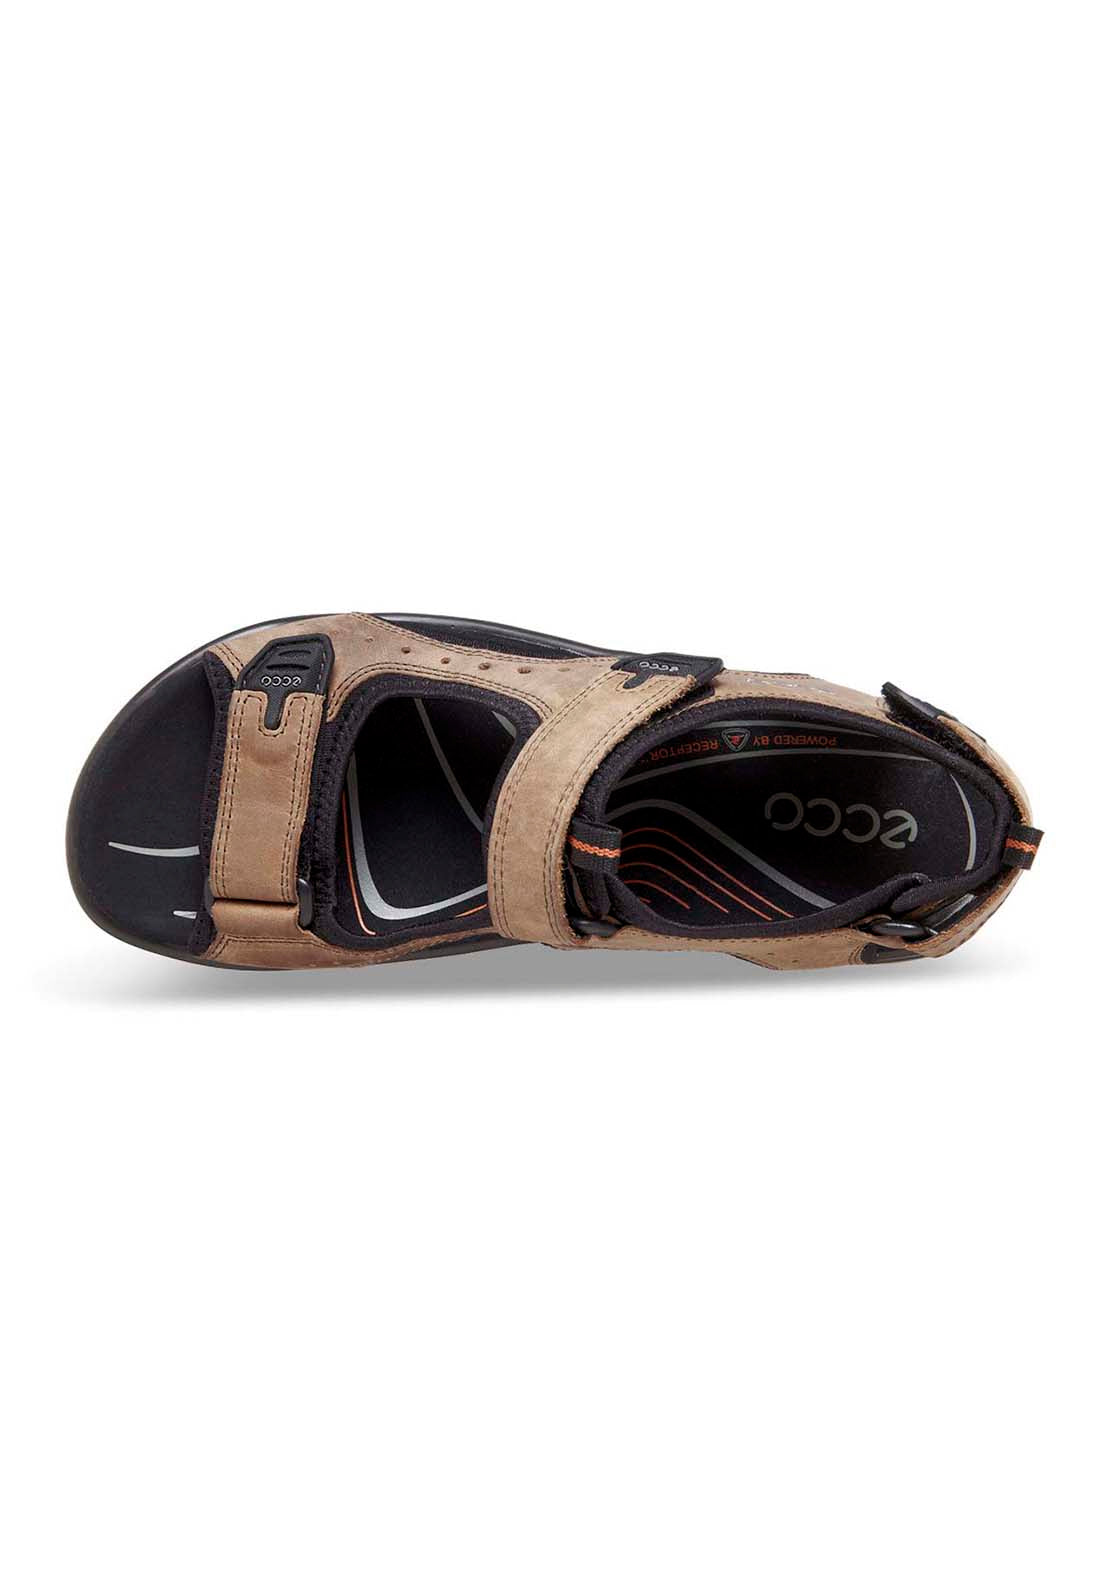 Ecco Offroad Sandal - Brown 3 Shaws Department Stores